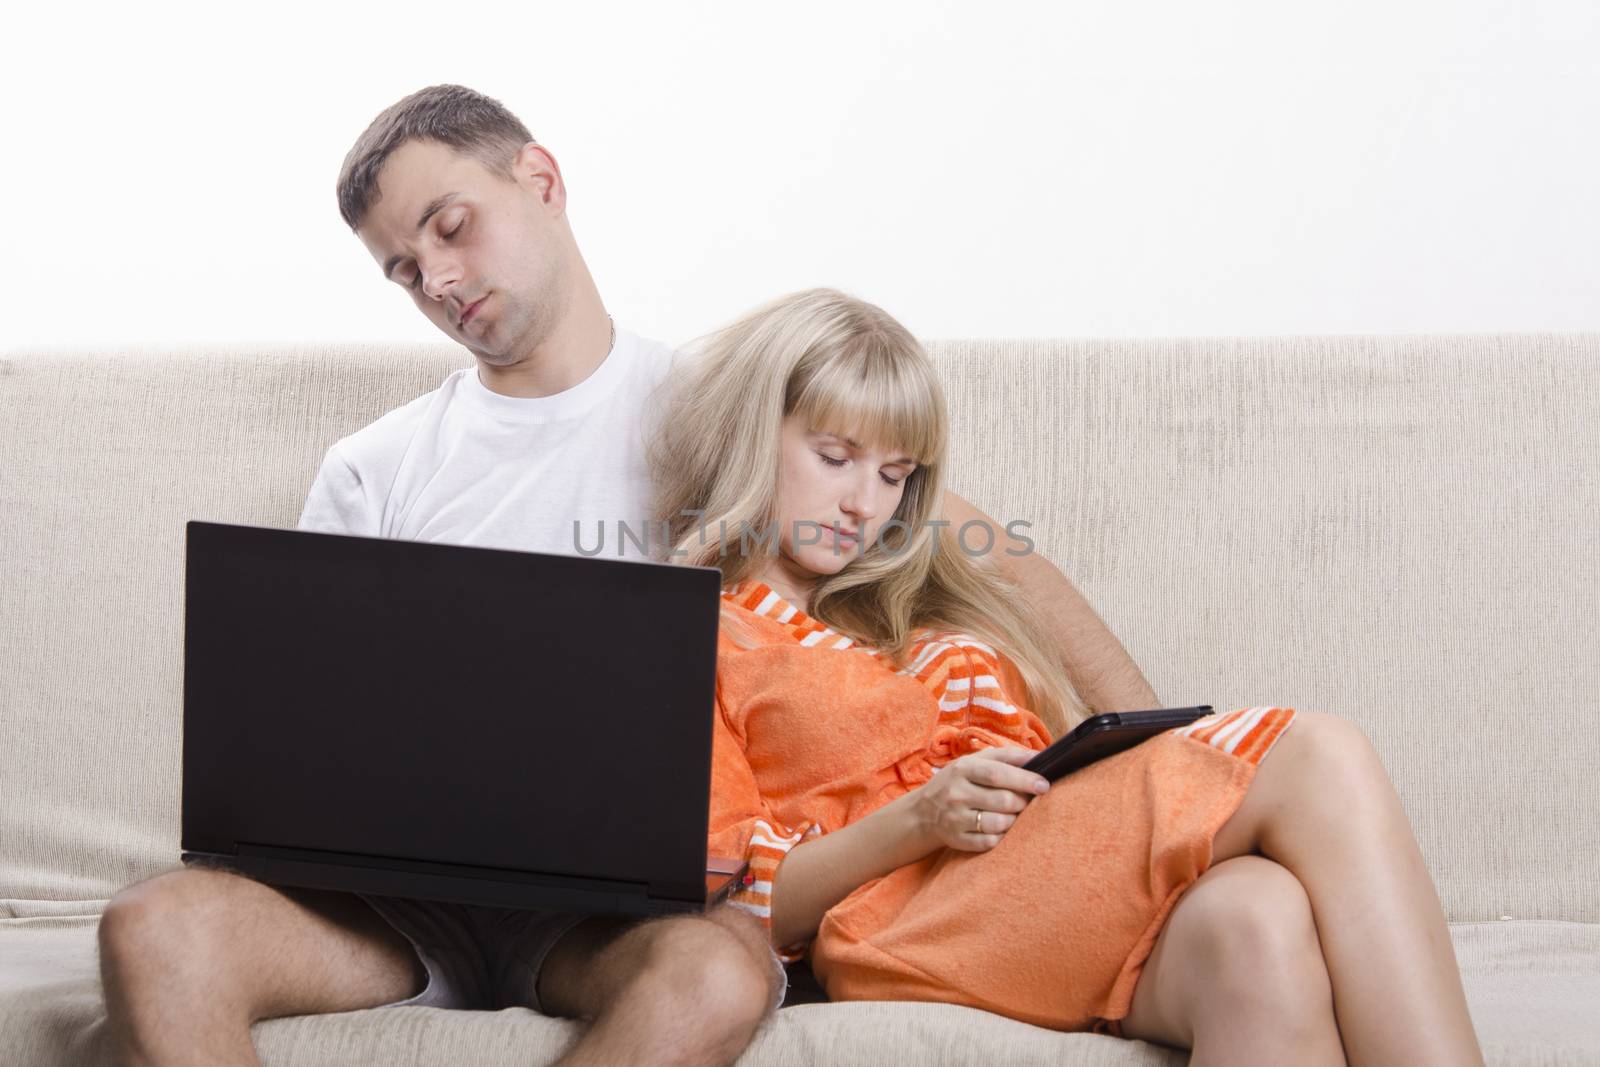 A boy and a girl sitting on the couch. A guy sitting with a laptop, a girl with a tablet. The girl clung. Both fell asleep.